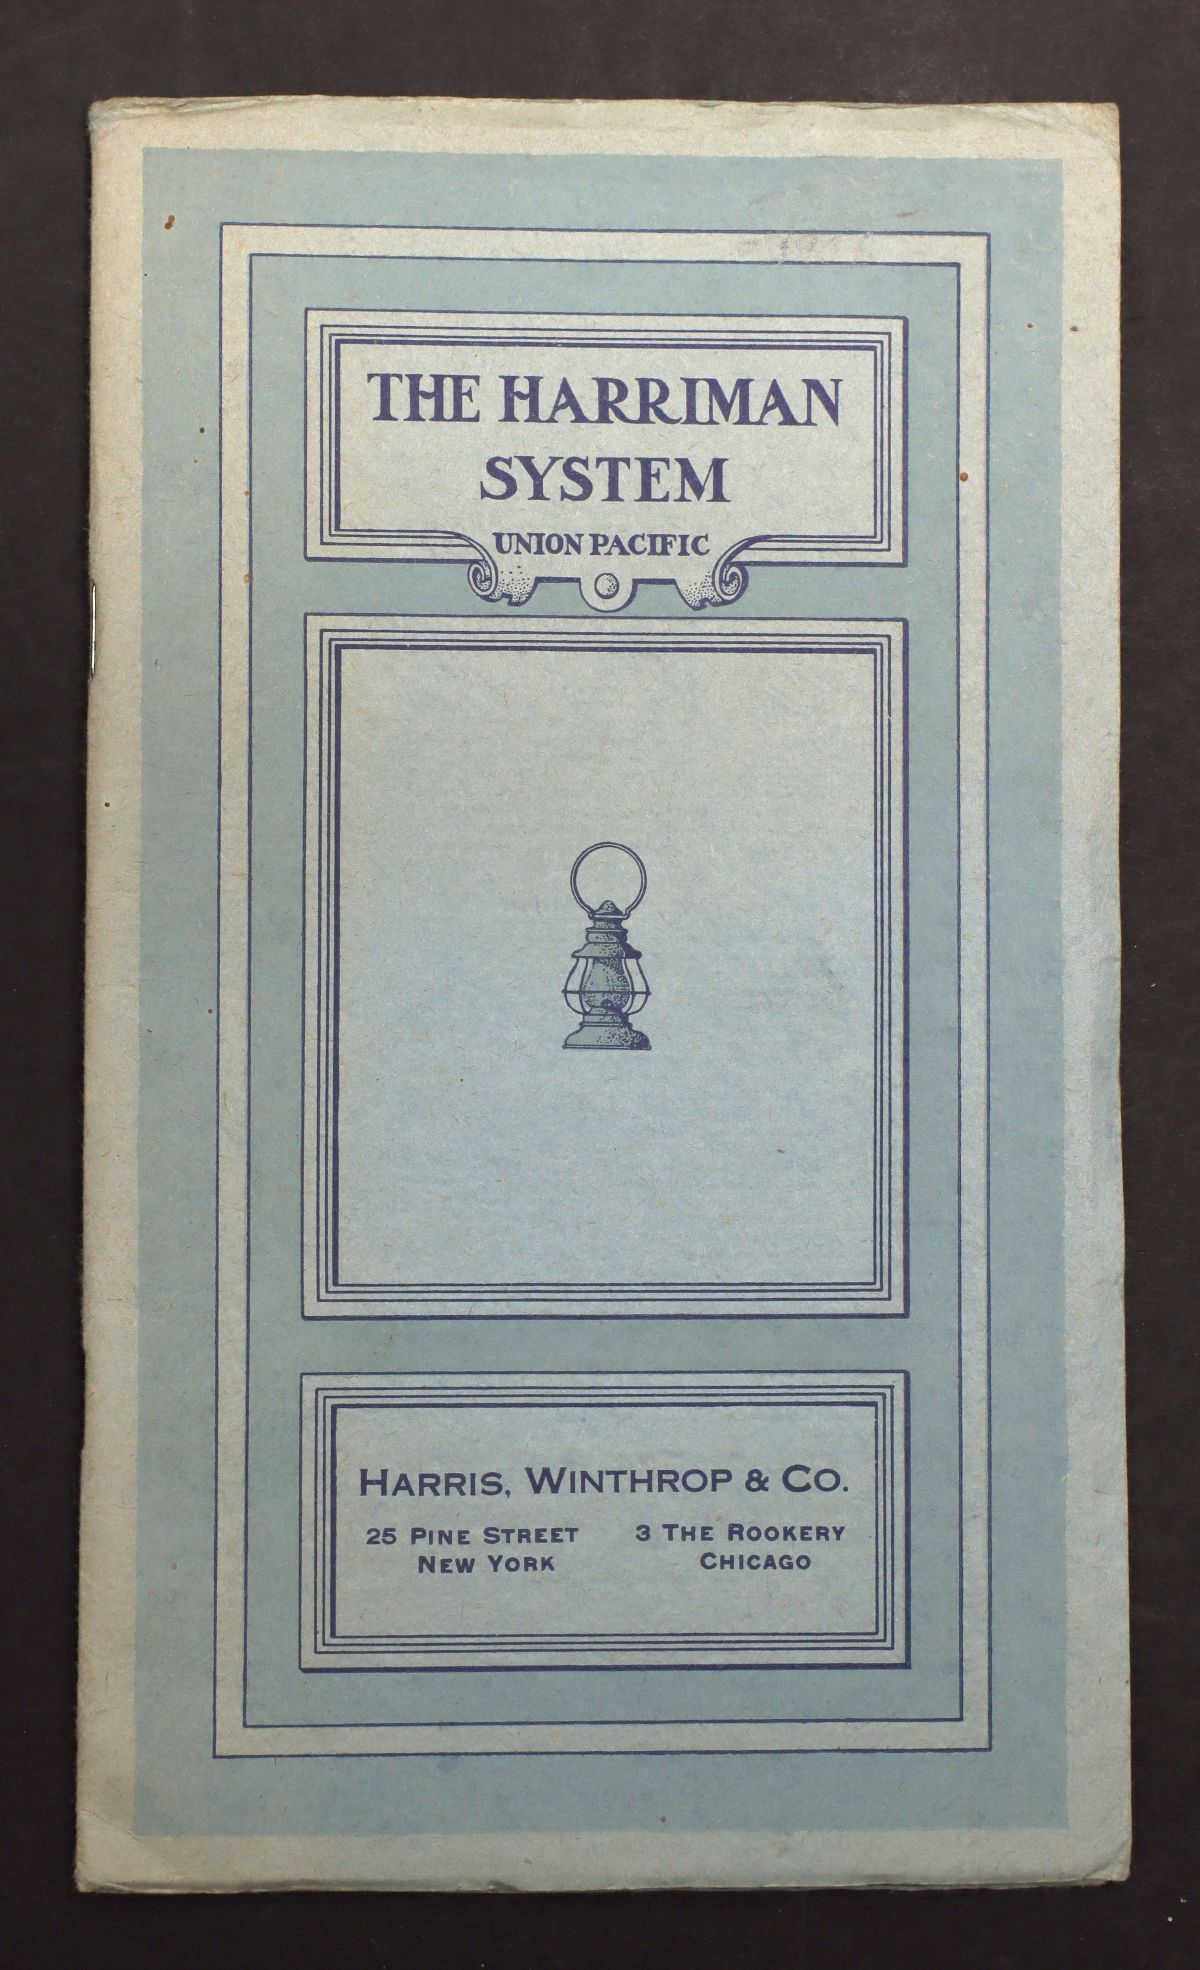 A UNION PACIFIC 'HARRIMAN SYSTEM' BOOK WITH MAP